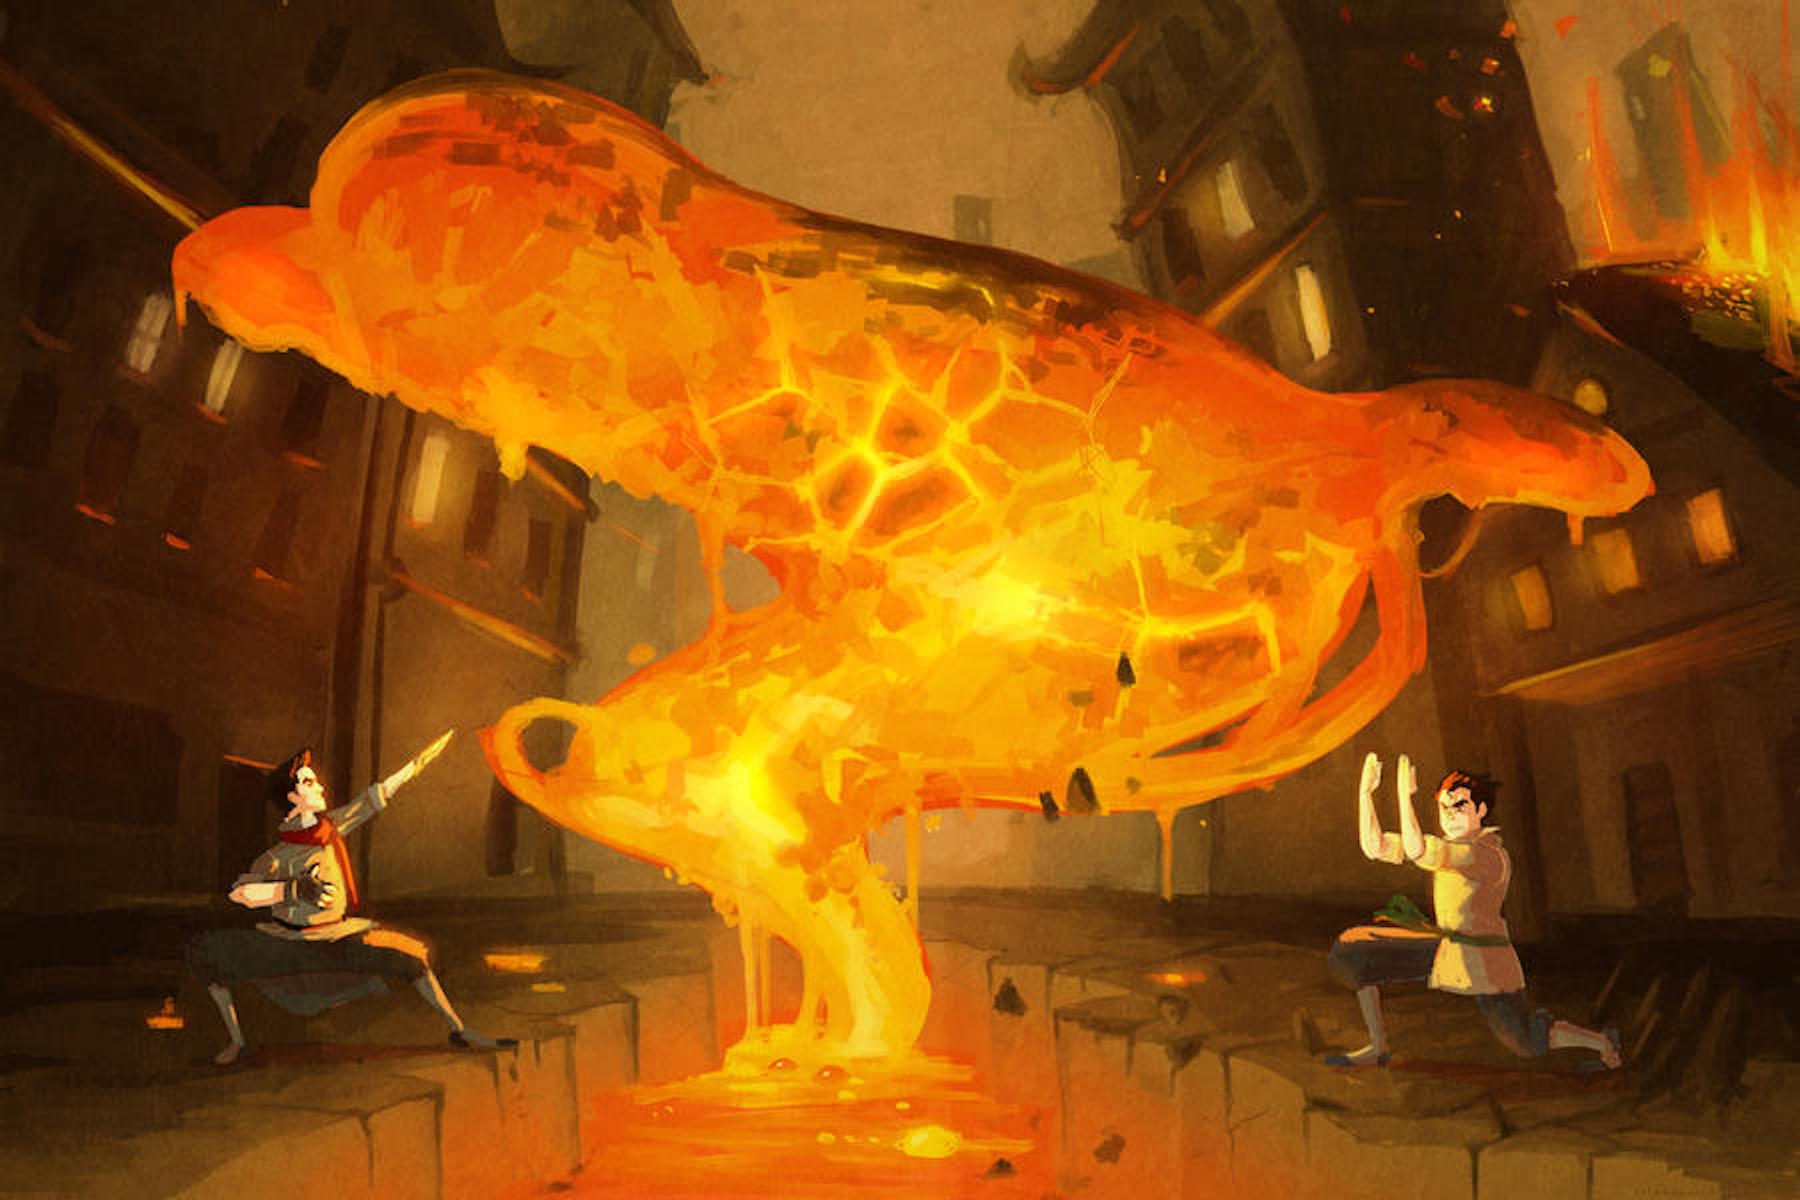 Two characters lavabending, causing lava to swirl between them.